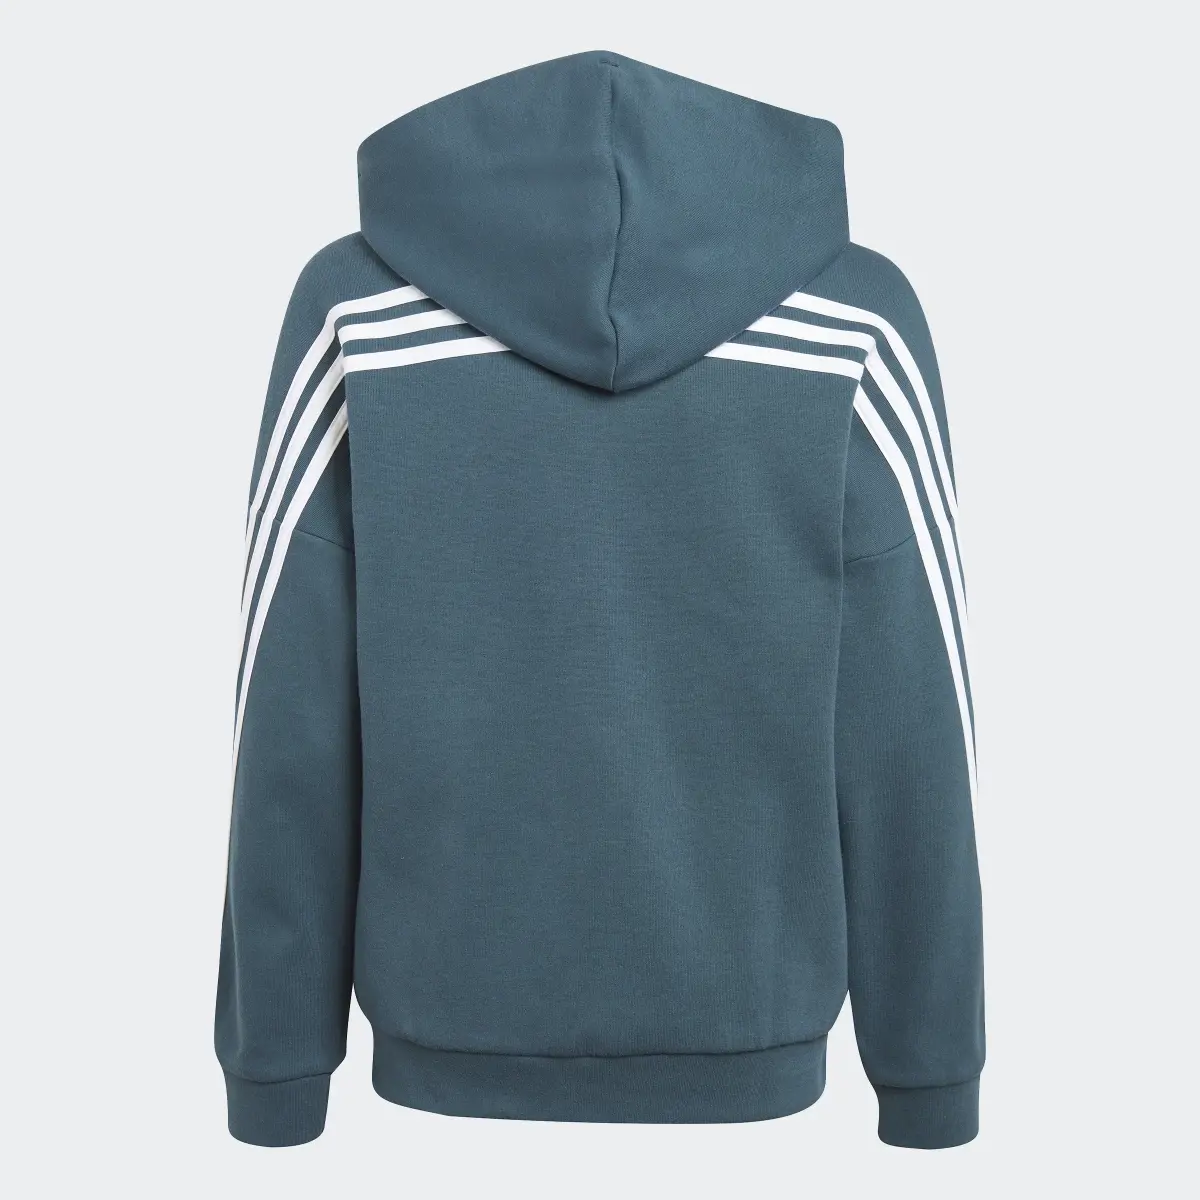 Adidas Future Icons 3-Stripes Full-Zip Hooded Track Top. 2